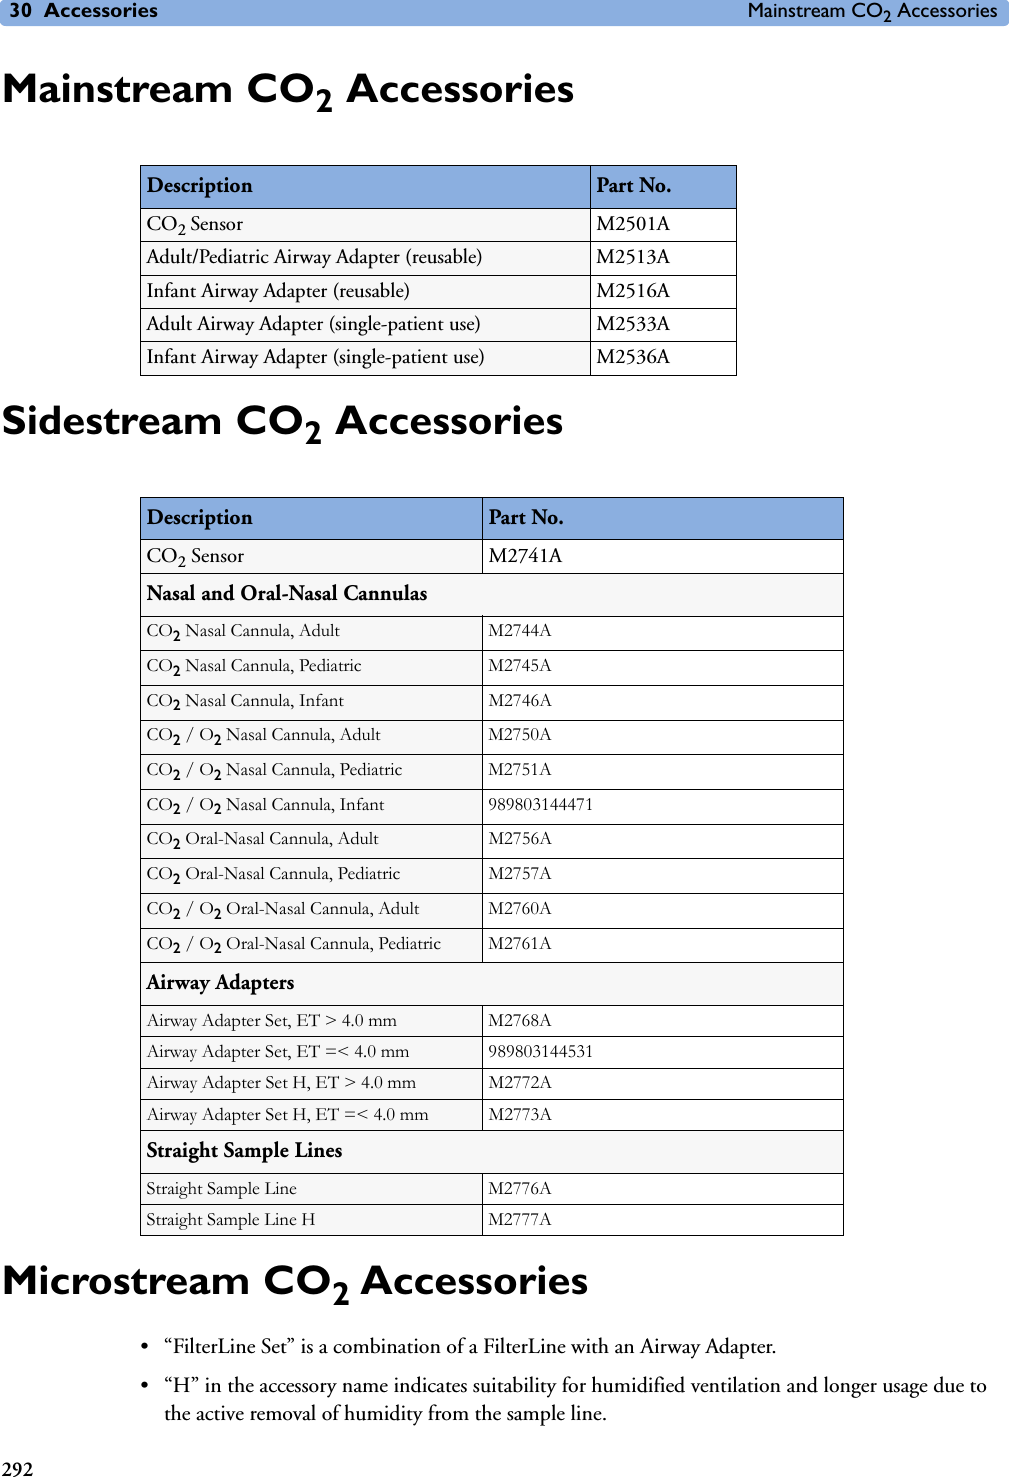 30 Accessories Mainstream CO2 Accessories292Mainstream CO2 AccessoriesSidestream CO2 AccessoriesMicrostream CO2 Accessories• “FilterLine Set” is a combination of a FilterLine with an Airway Adapter. • “H” in the accessory name indicates suitability for humidified ventilation and longer usage due to the active removal of humidity from the sample line.Description Part No. CO2 Sensor M2501AAdult/Pediatric Airway Adapter (reusable) M2513AInfant Airway Adapter (reusable) M2516AAdult Airway Adapter (single-patient use) M2533AInfant Airway Adapter (single-patient use) M2536ADescription Part No. CO2 Sensor M2741ANasal and Oral-Nasal CannulasCO2 Nasal Cannula, Adult M2744ACO2 Nasal Cannula, Pediatric M2745ACO2 Nasal Cannula, Infant M2746ACO2 / O2 Nasal Cannula, Adult M2750ACO2 / O2 Nasal Cannula, Pediatric M2751ACO2 / O2 Nasal Cannula, Infant 989803144471CO2 Oral-Nasal Cannula, Adult M2756ACO2 Oral-Nasal Cannula, Pediatric M2757ACO2 / O2 Oral-Nasal Cannula, Adult M2760ACO2 / O2 Oral-Nasal Cannula, Pediatric M2761AAirway AdaptersAirway Adapter Set, ET &gt; 4.0 mm M2768AAirway Adapter Set, ET =&lt; 4.0 mm 989803144531Airway Adapter Set H, ET &gt; 4.0 mm M2772AAirway Adapter Set H, ET =&lt; 4.0 mm M2773AStraight Sample LinesStraight Sample Line M2776AStraight Sample Line H M2777A